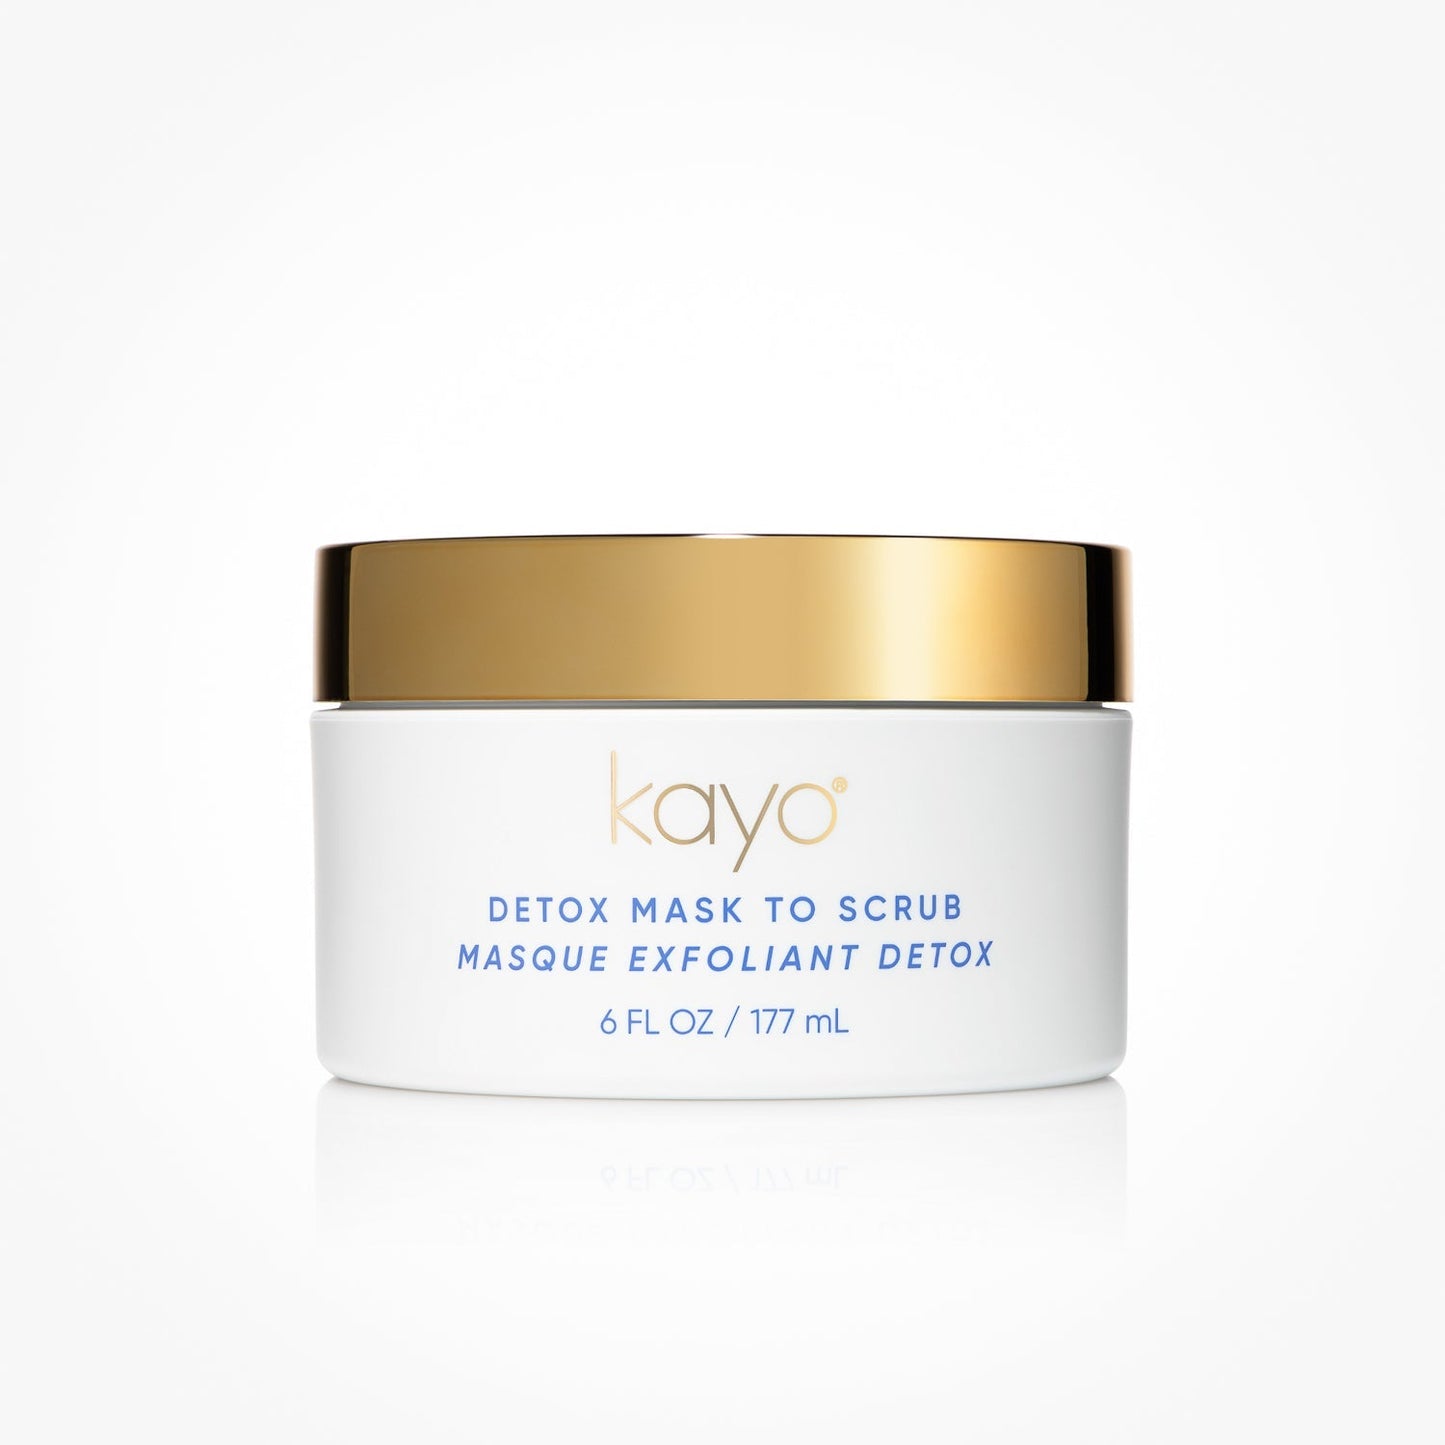 Buy Online Best Detox Mask to Scrub | Buy innovative clinical skincare products - TOPBODY